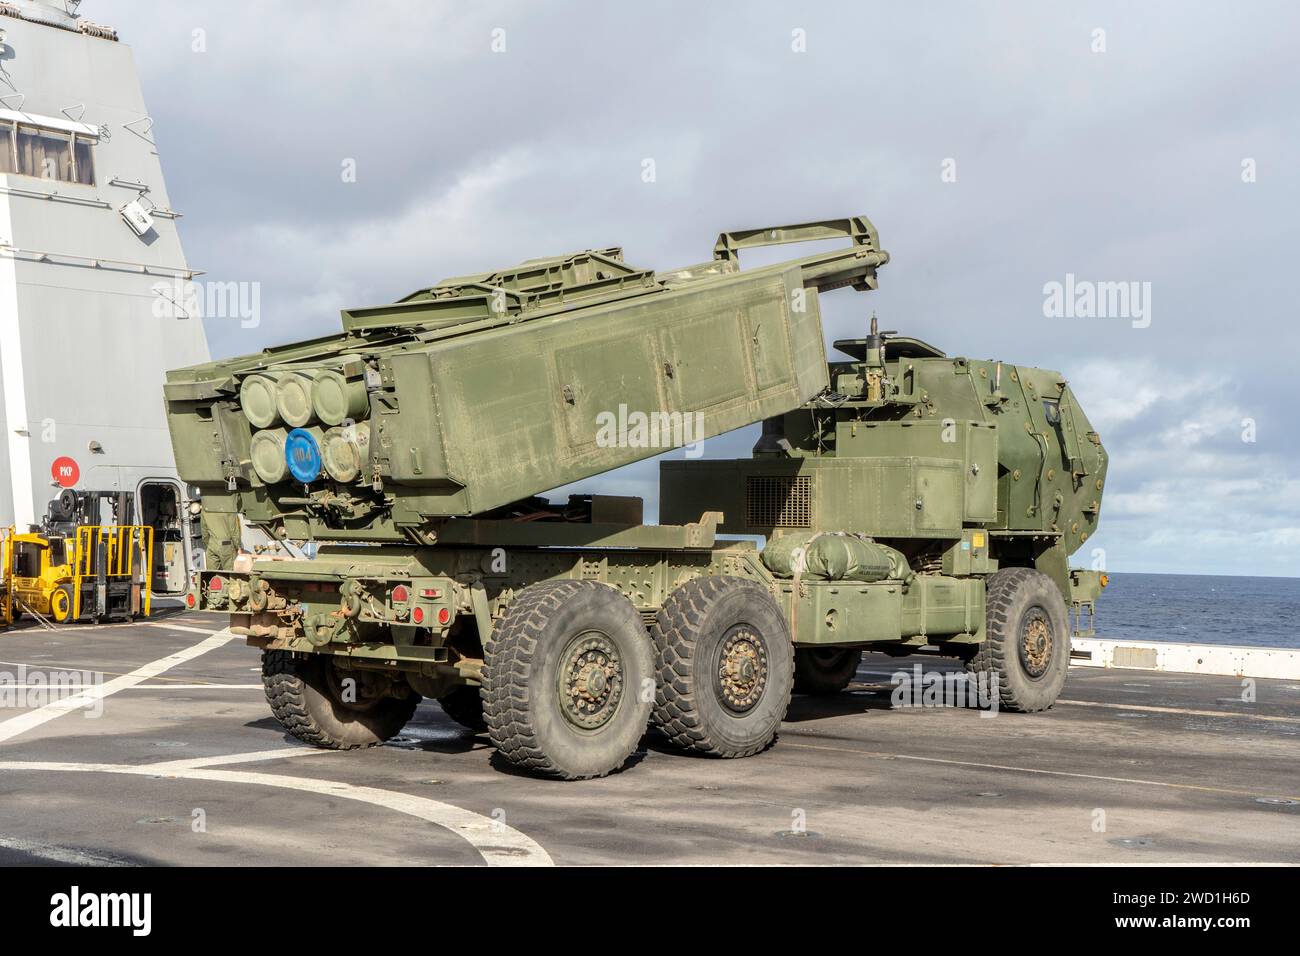 U.S. Marines position a HIMARS vehicle on the flight deck of a ship. Stock Photo